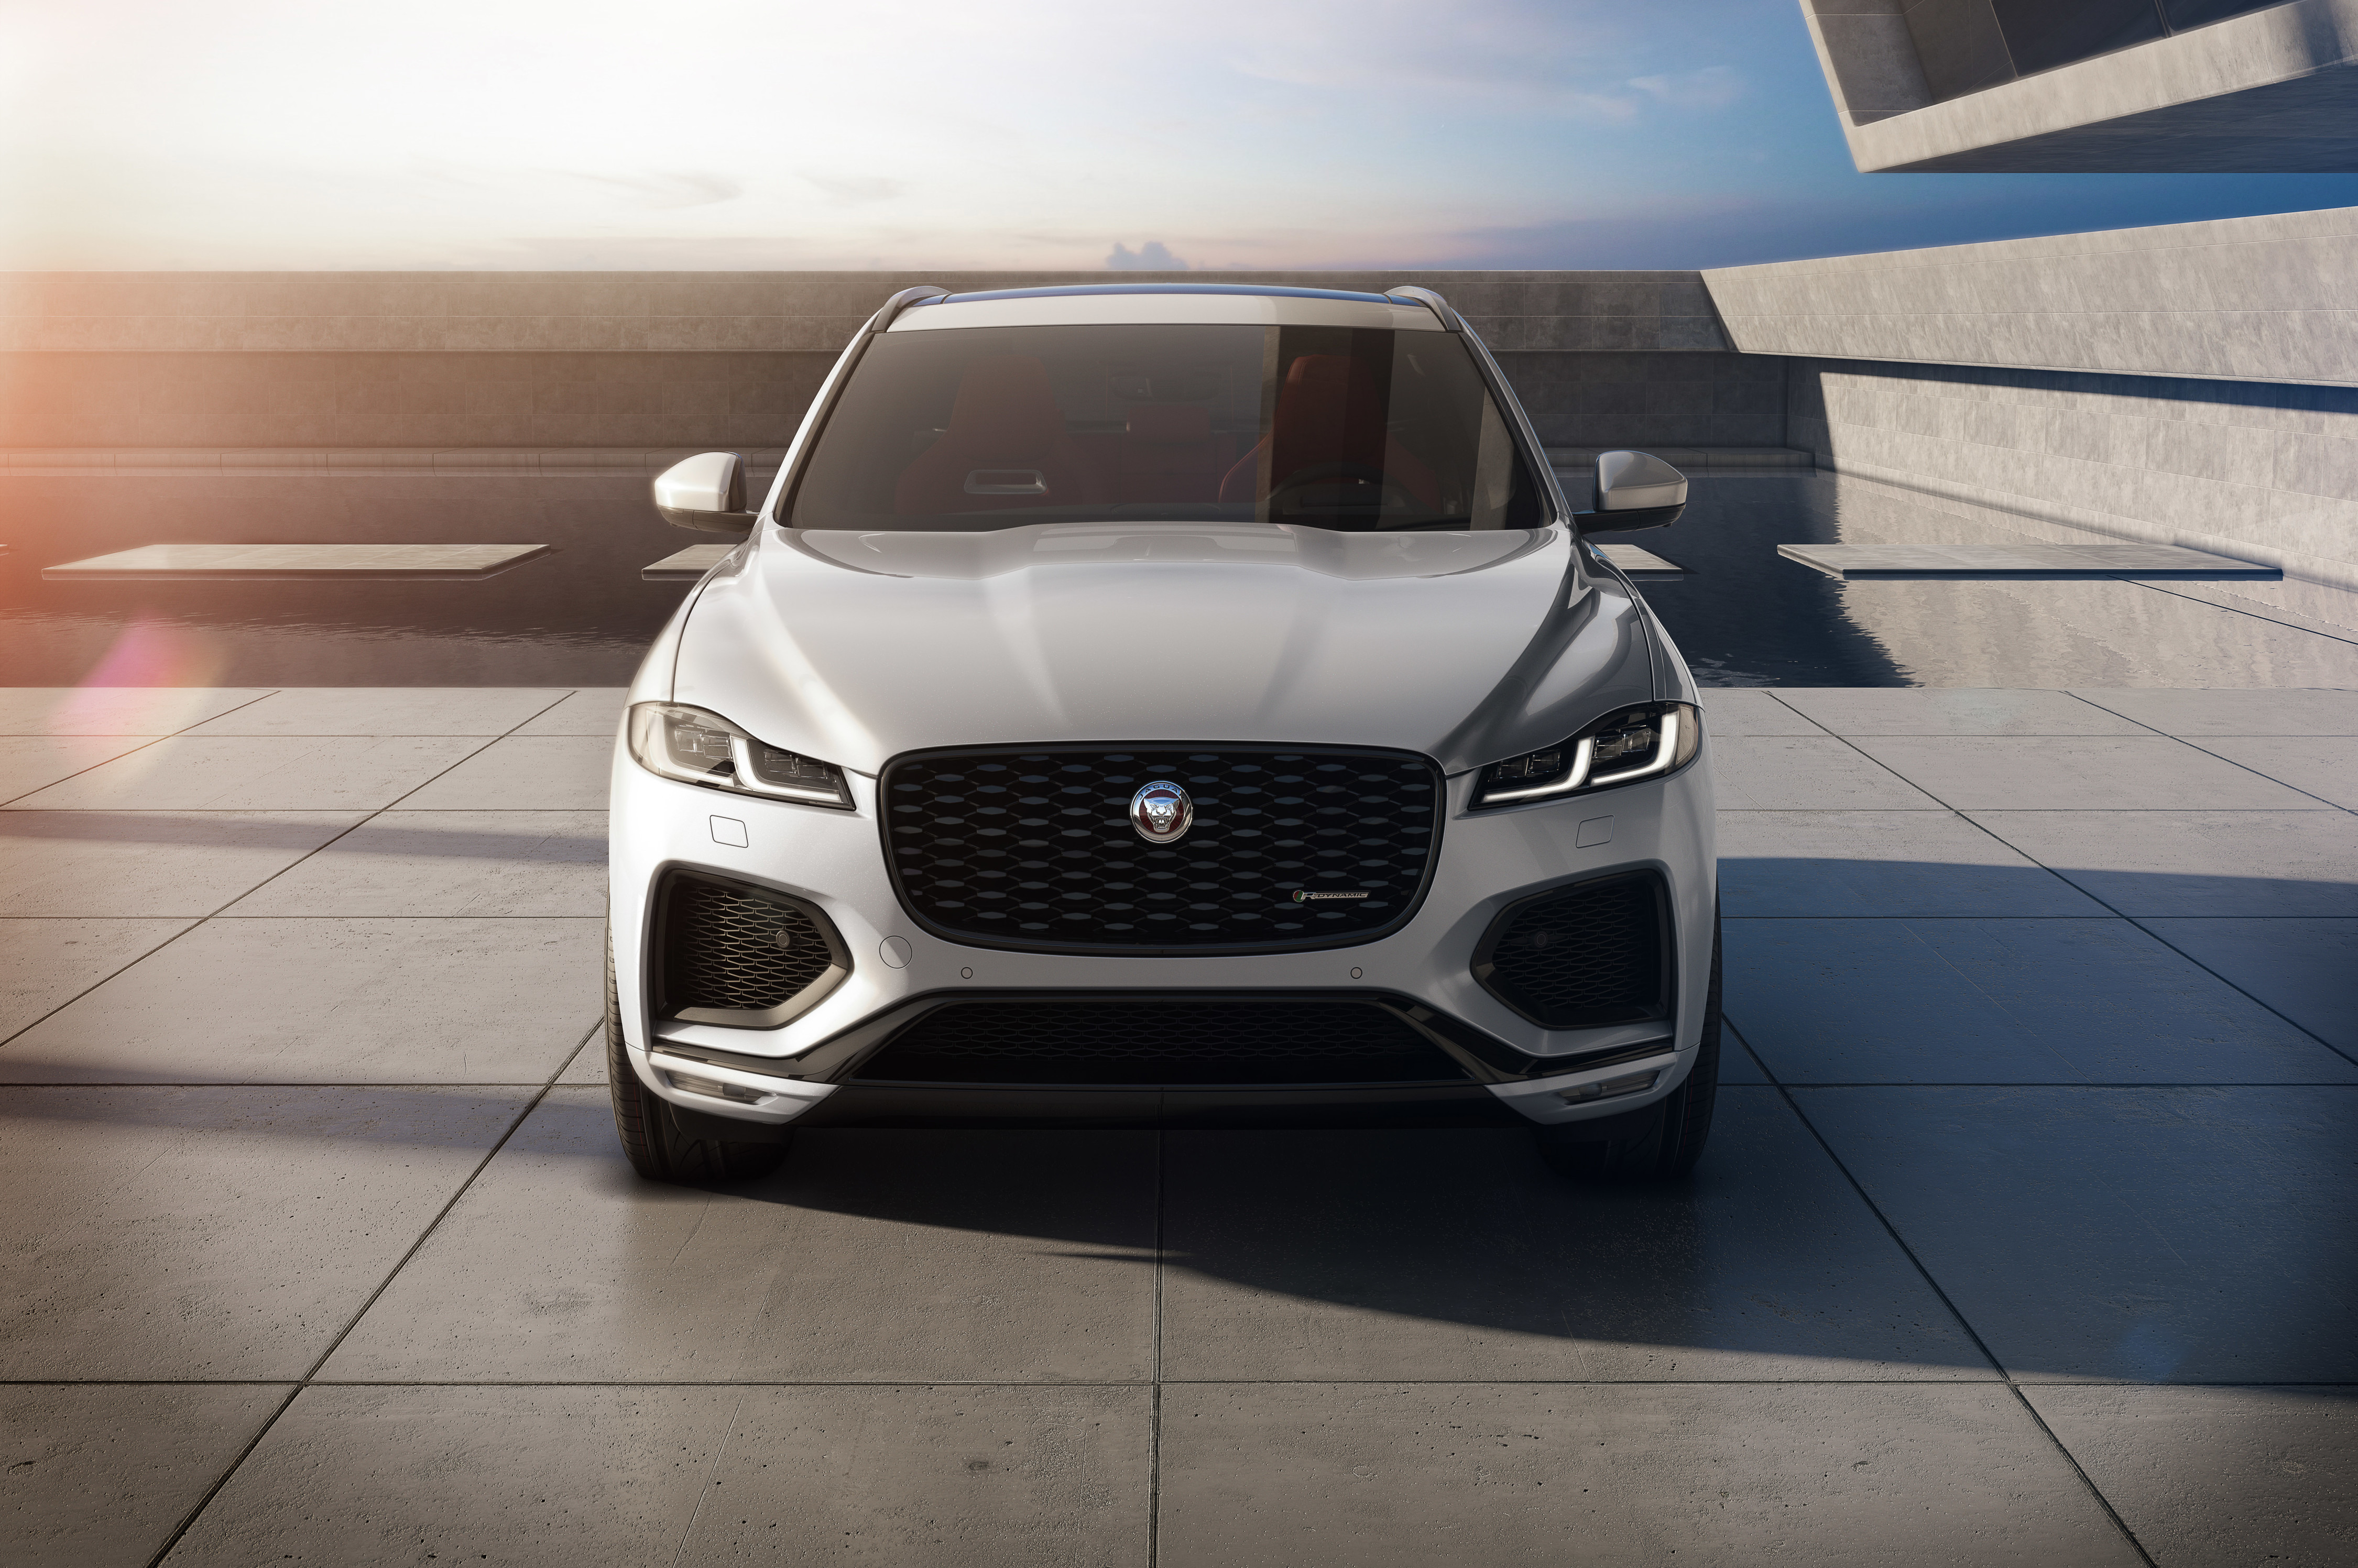 Jag F PACE 21 MY Studio Exterior Front Red Int 150920 1